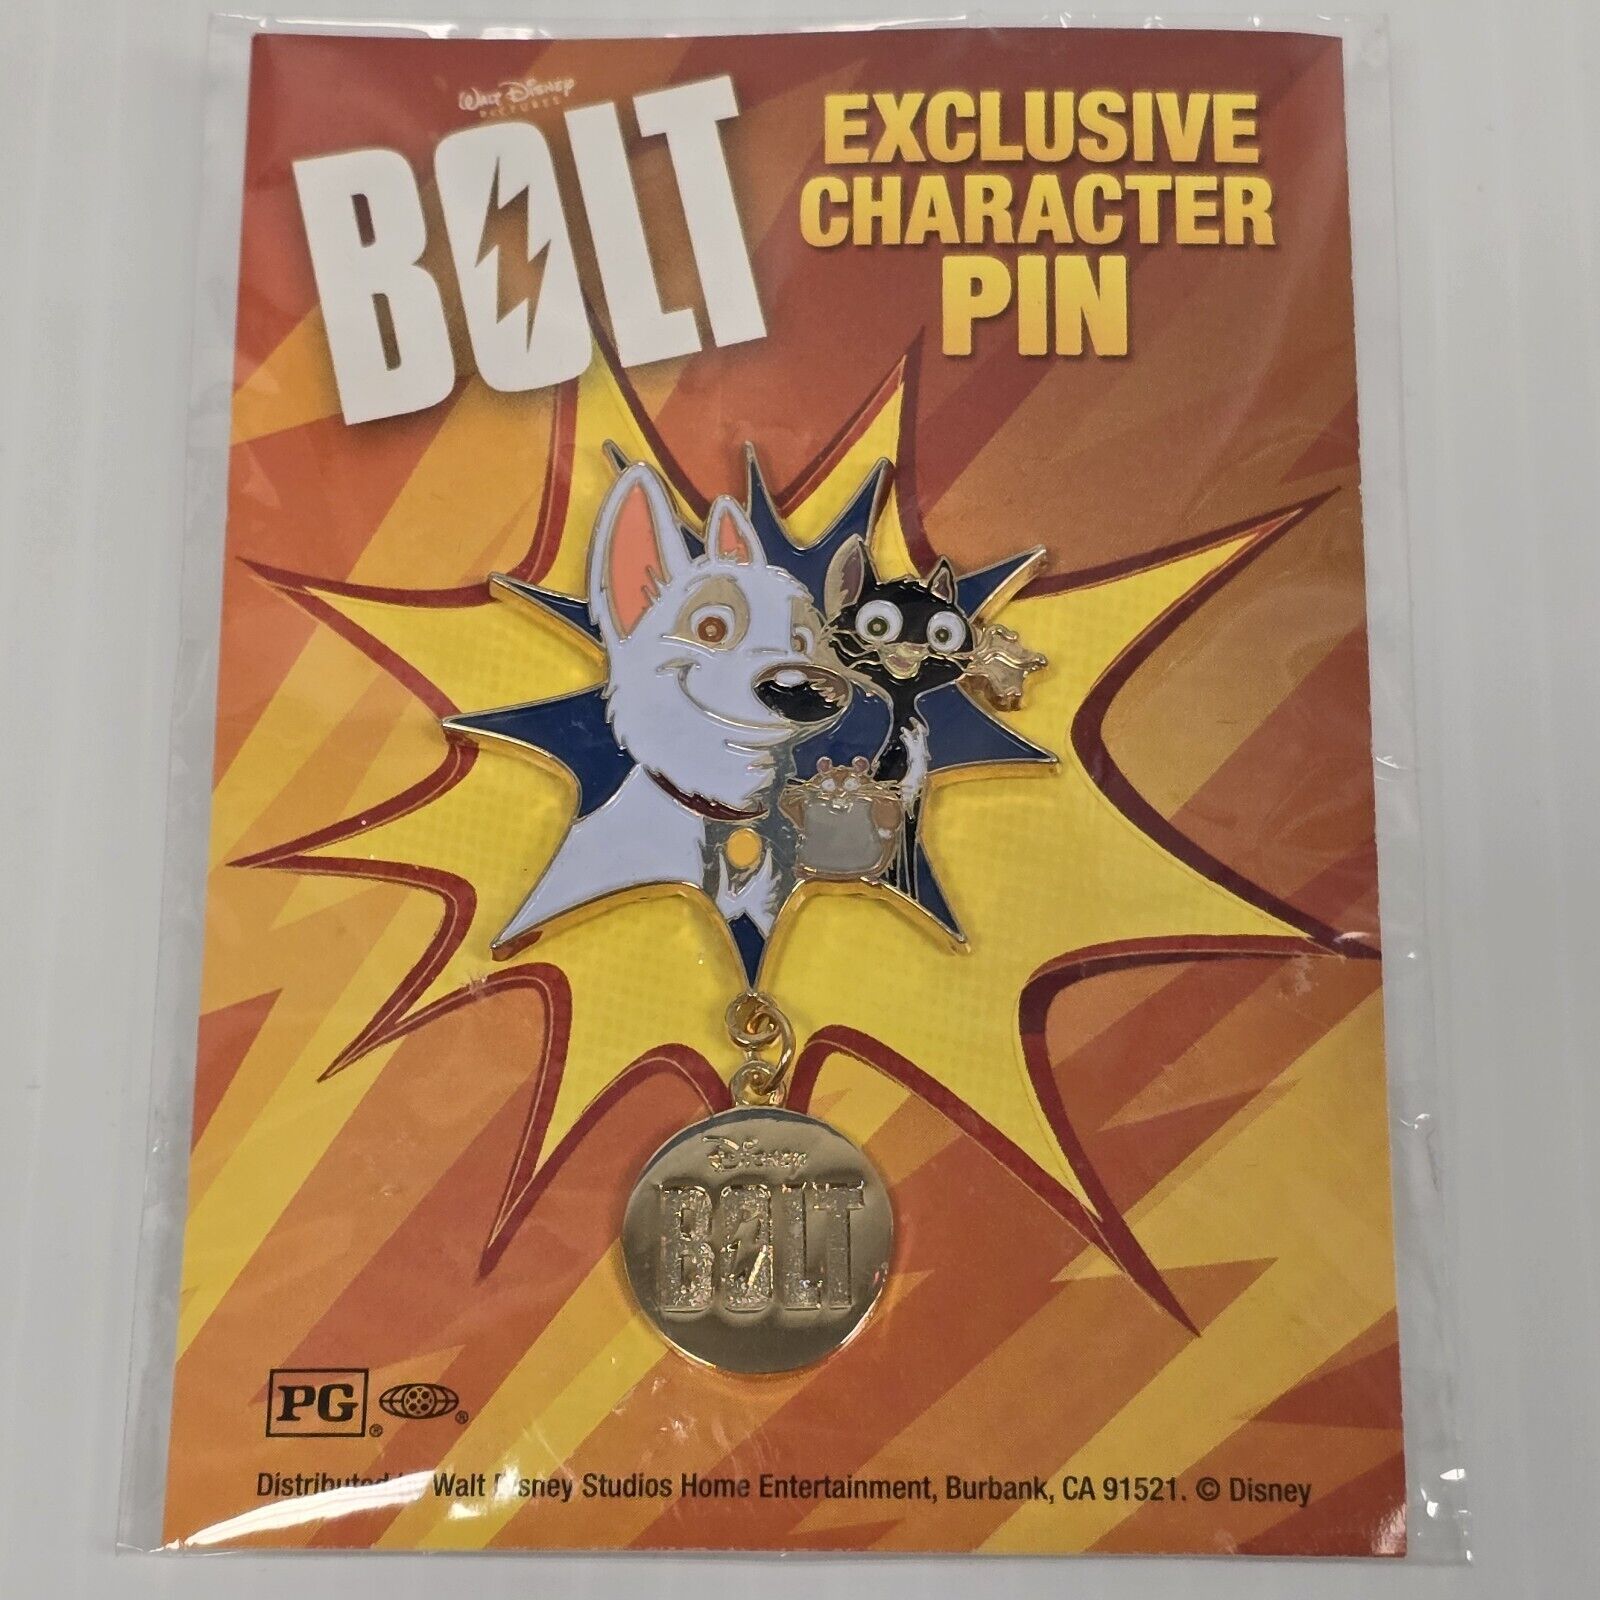 Bolt Walt Disney Exclusive Character Trading Pin - New in package